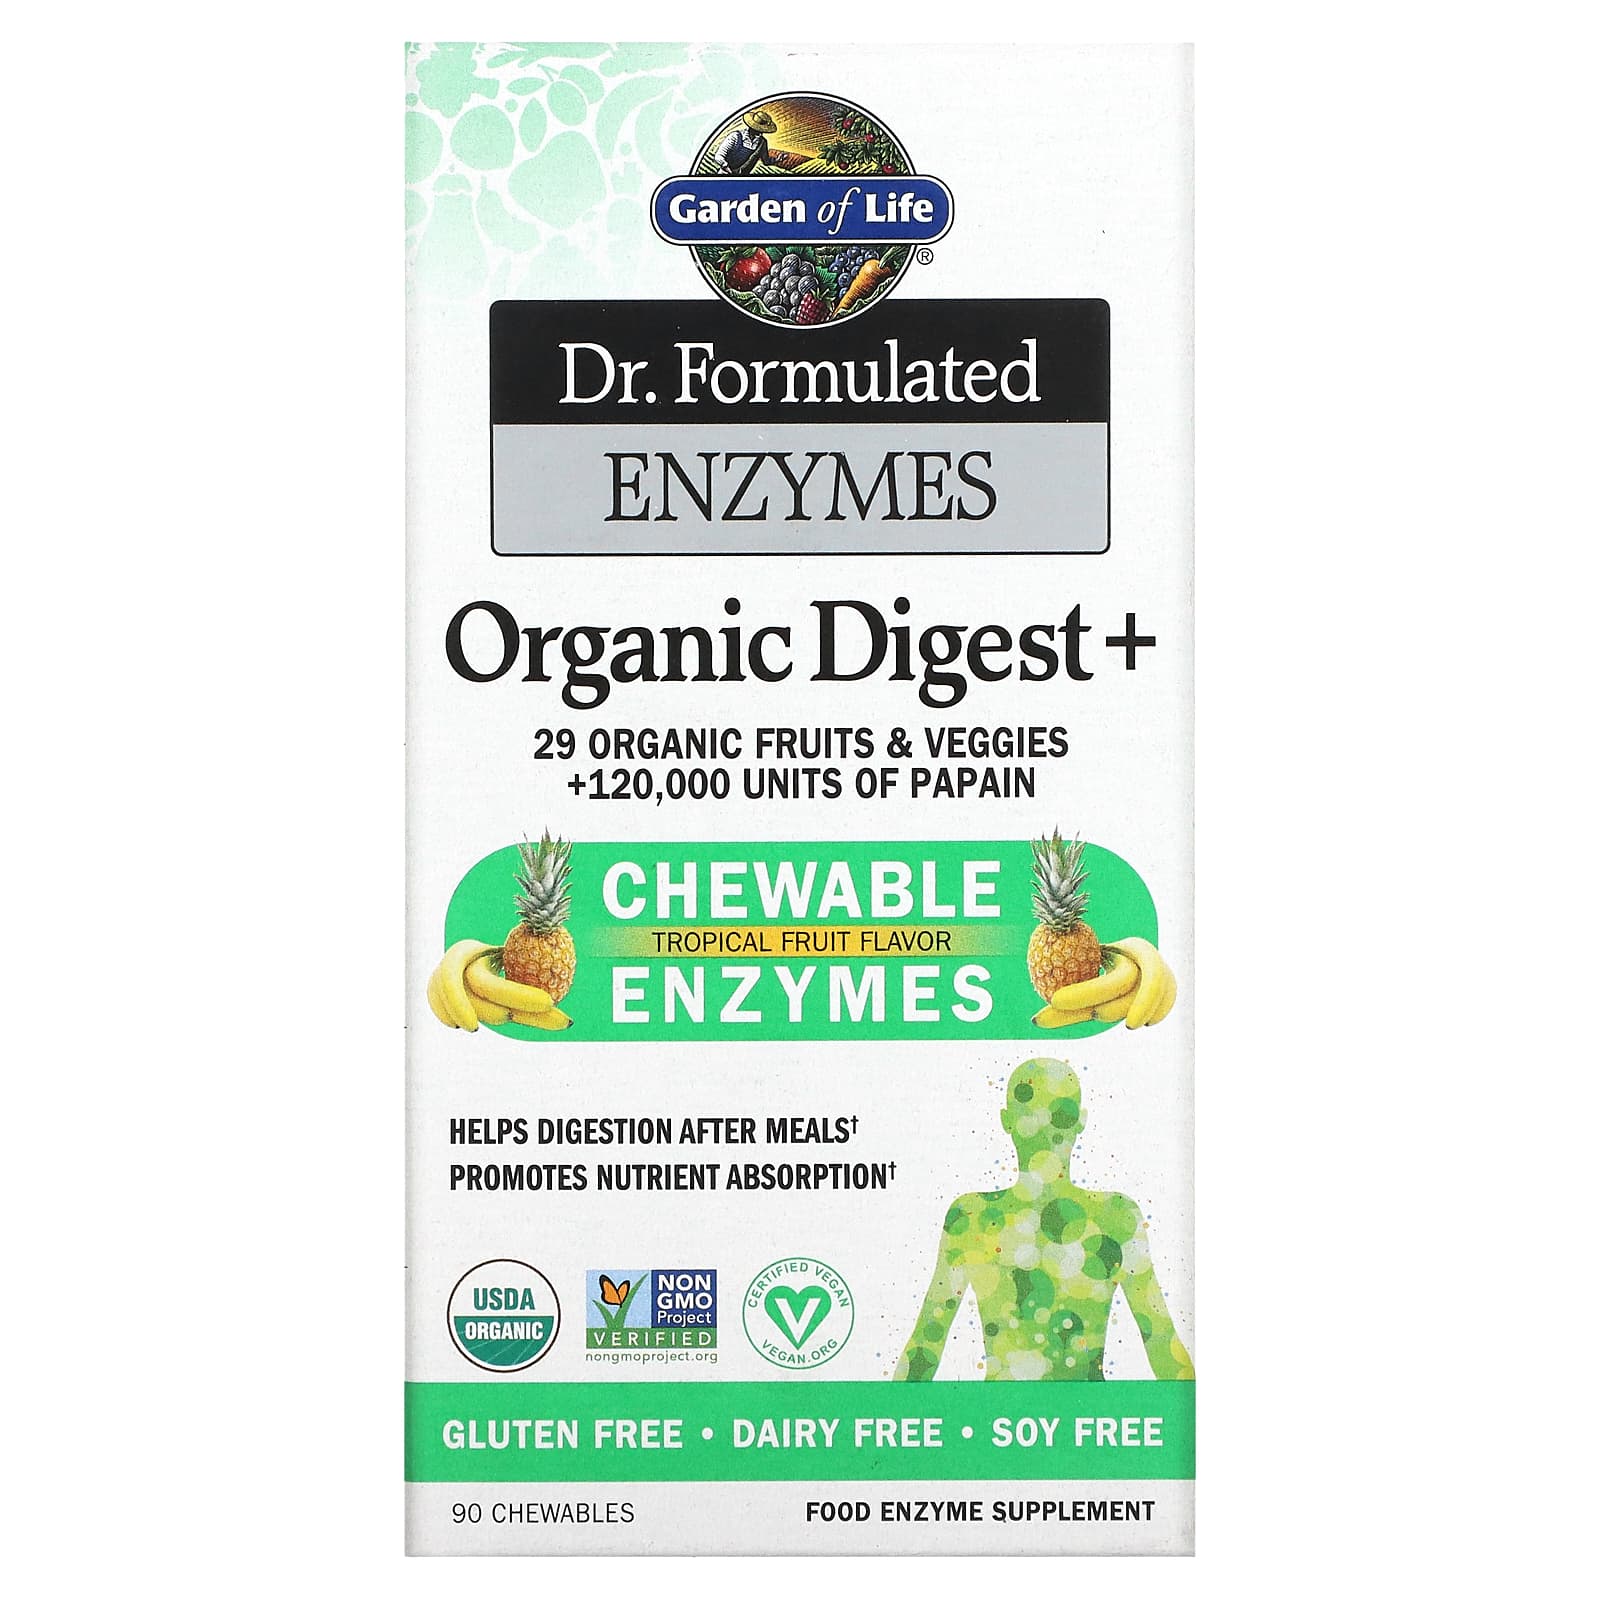 Garden of Life Organic Digest+ Enzymes, Chewable, Tropical Fruit Flavor